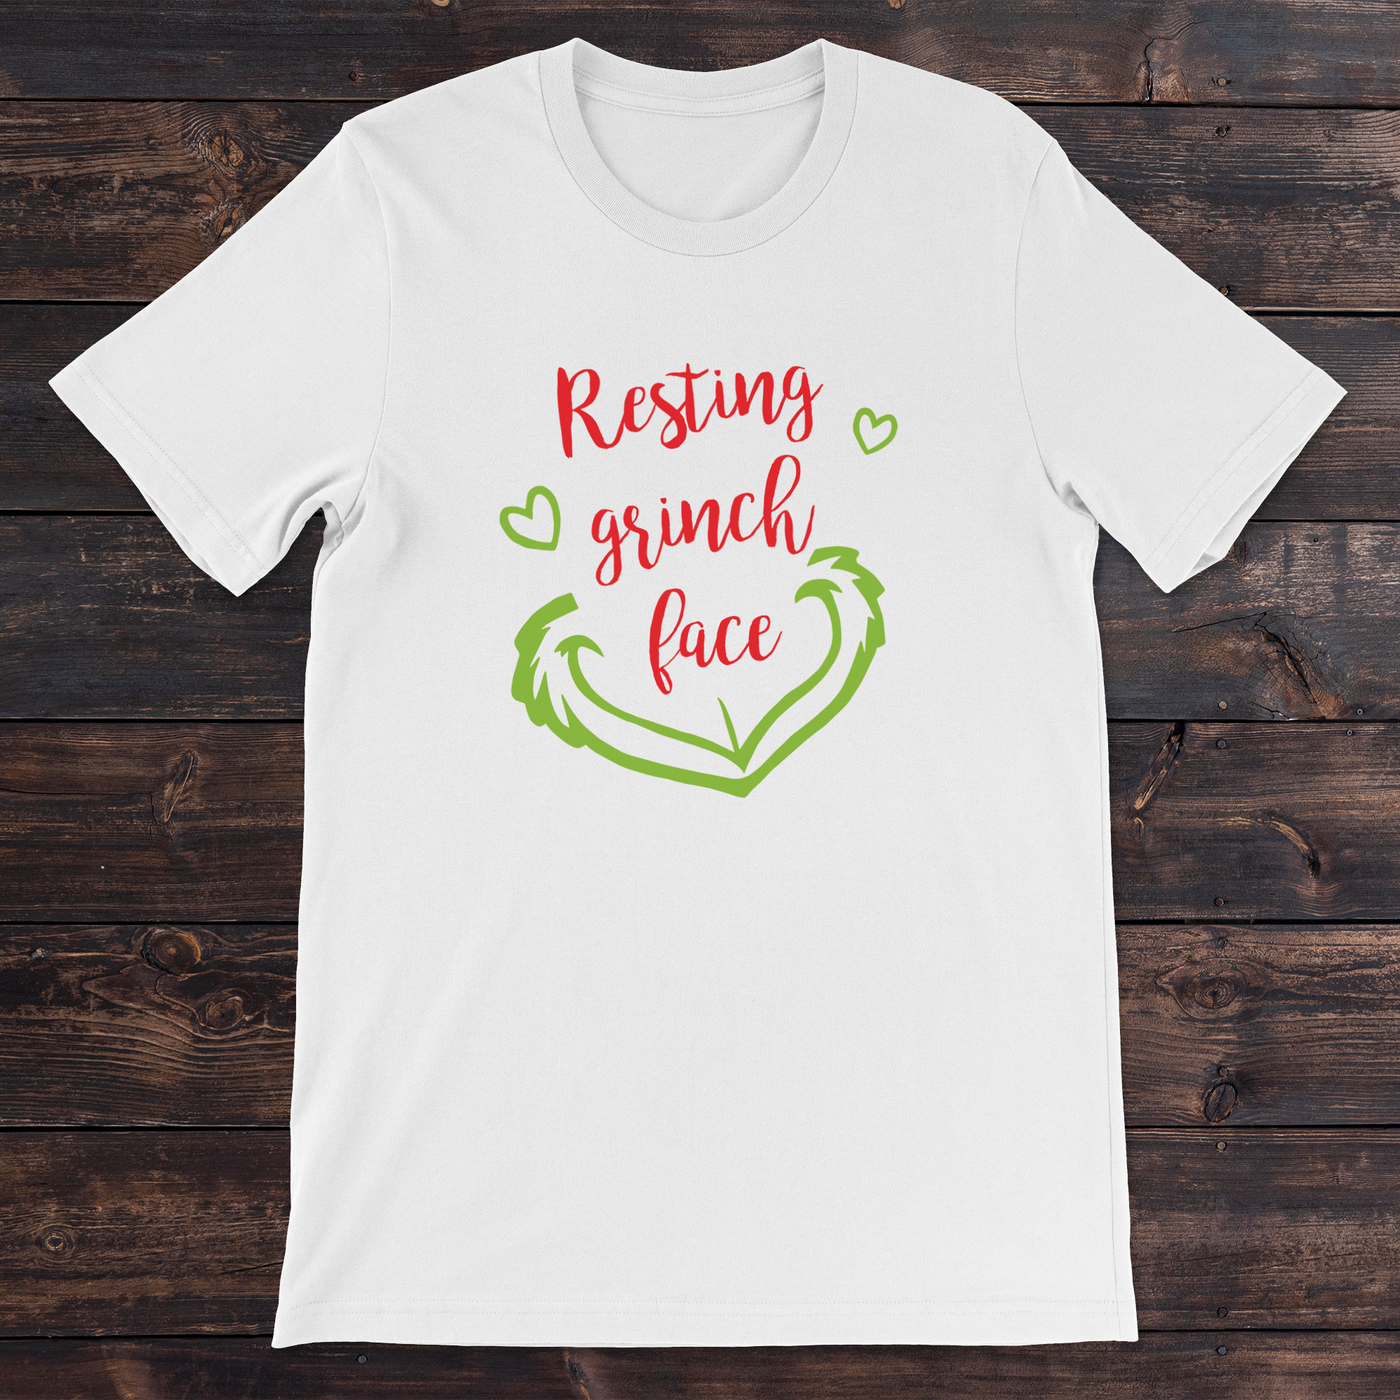 Daydream Tees Resting Grinch Face